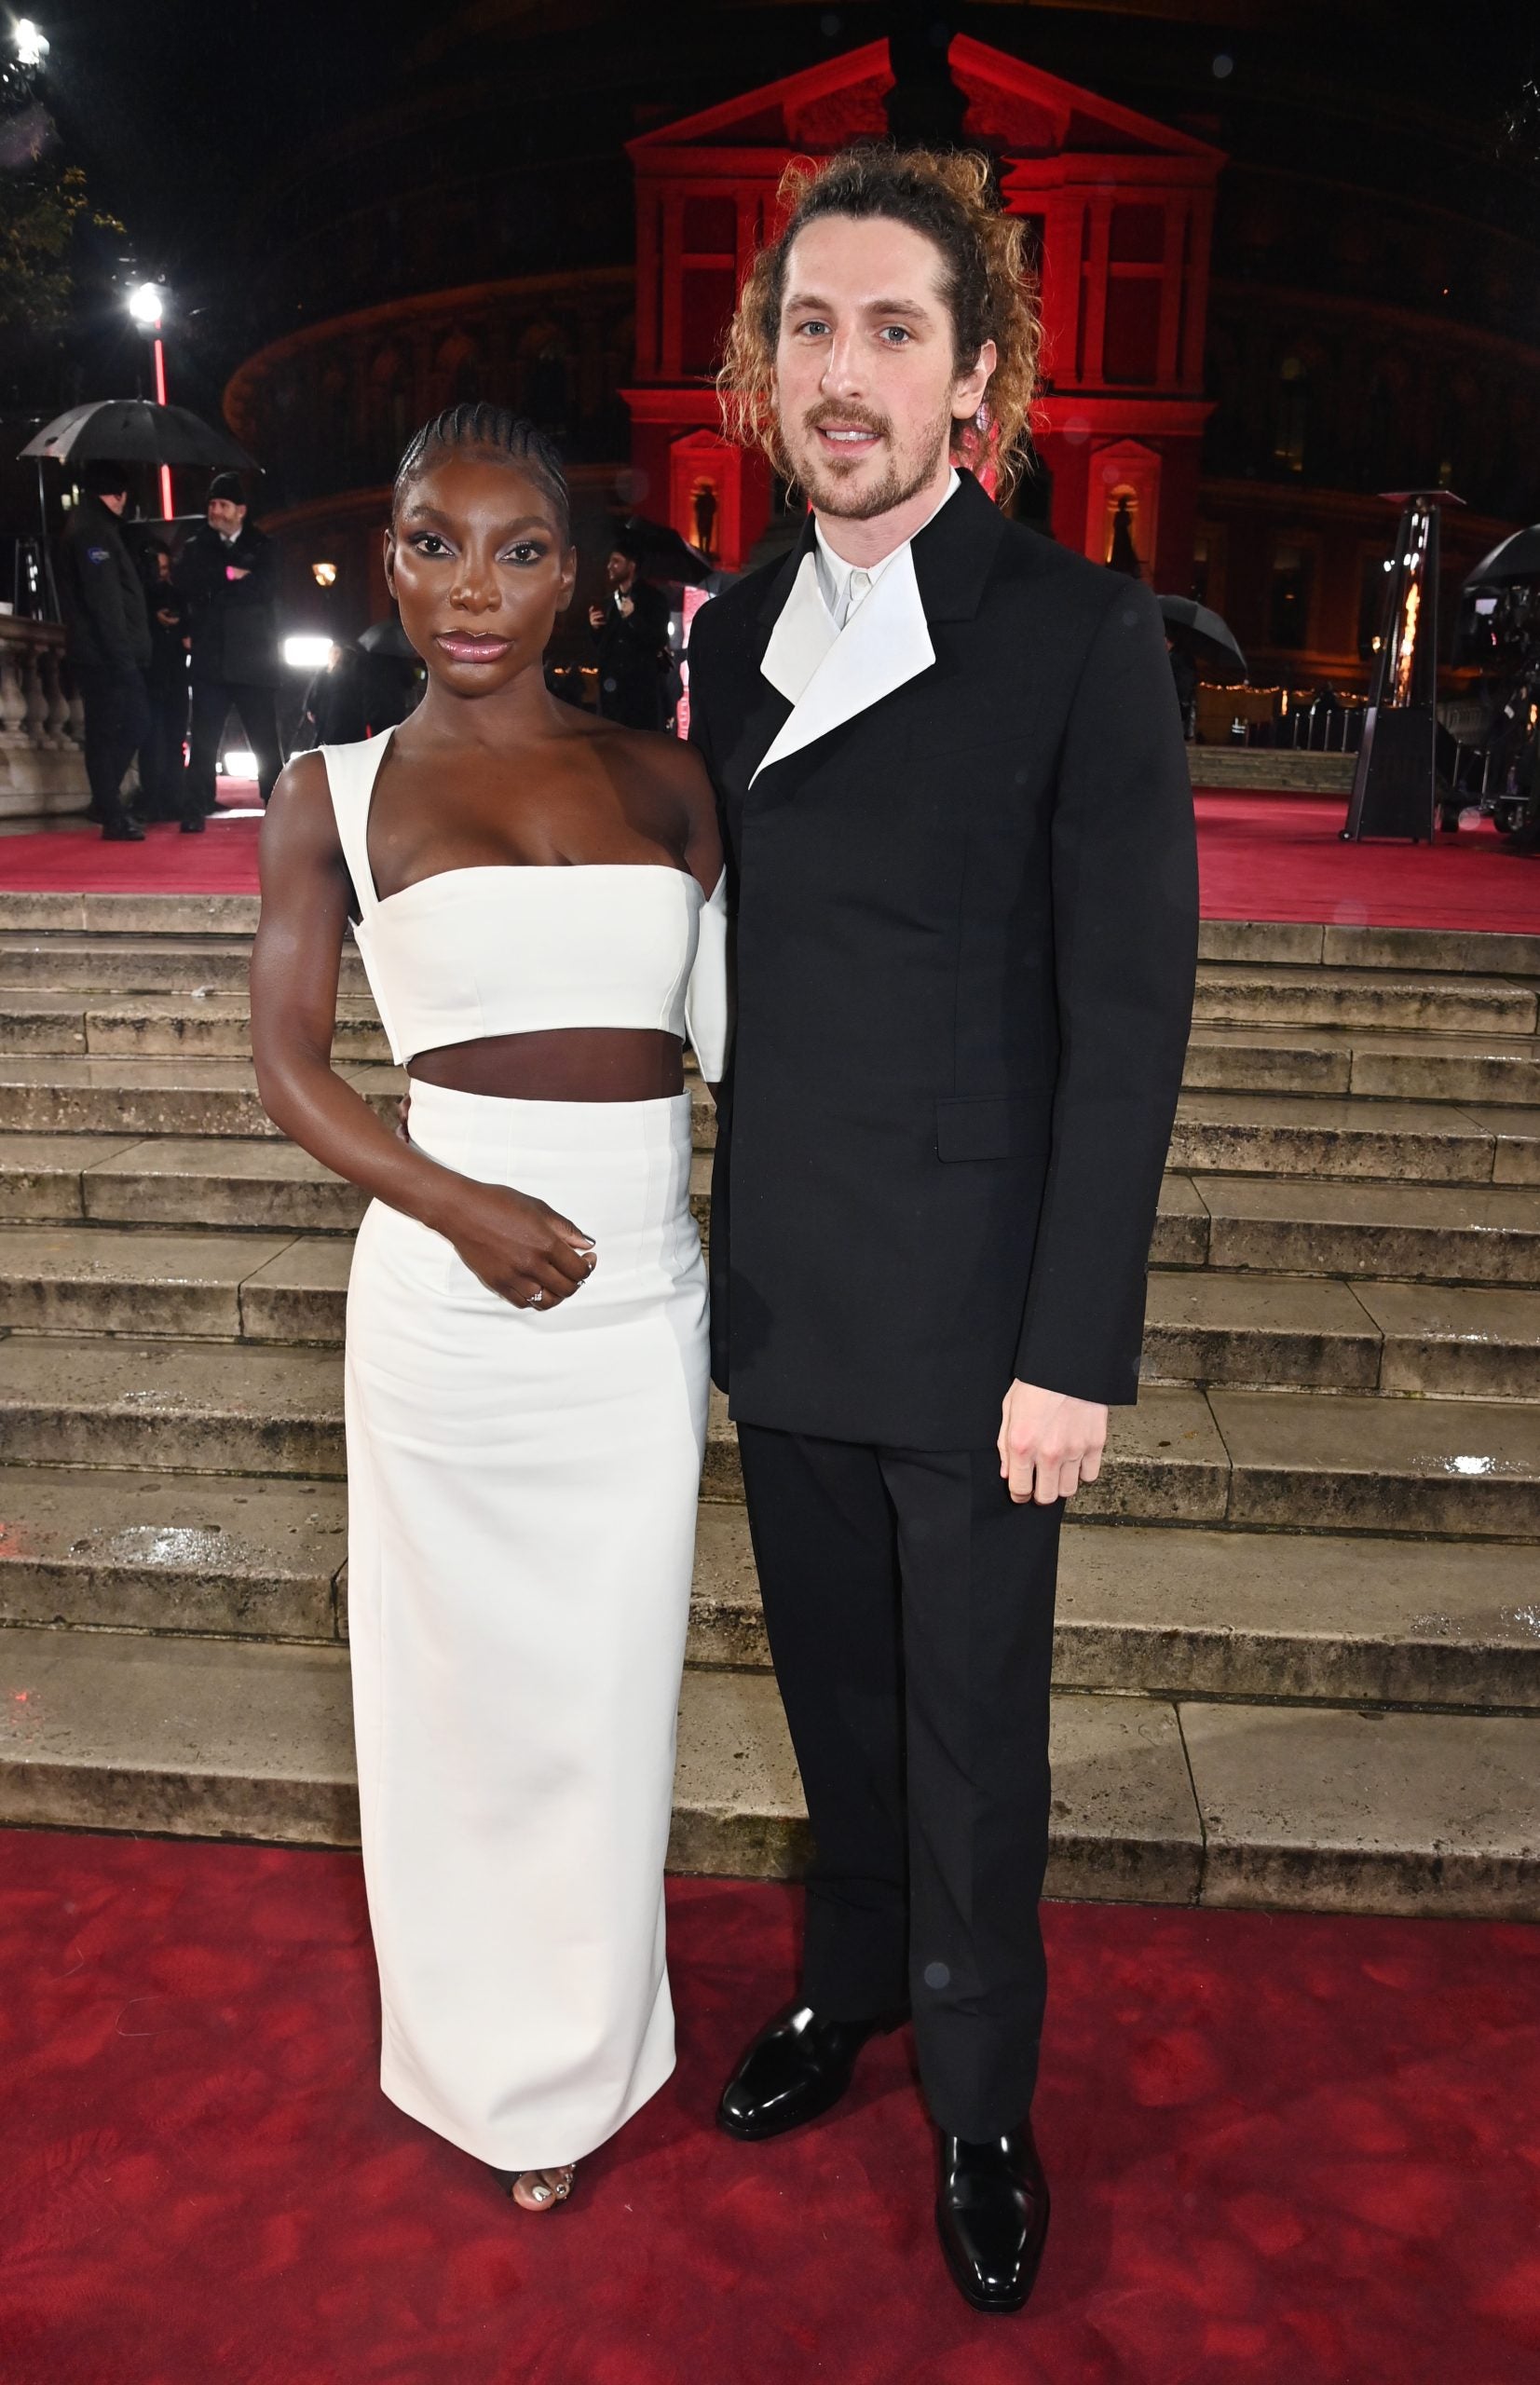 ‘Hard Launch’: Michaela Coel And Her New Man Make Their Red Carpet Debut